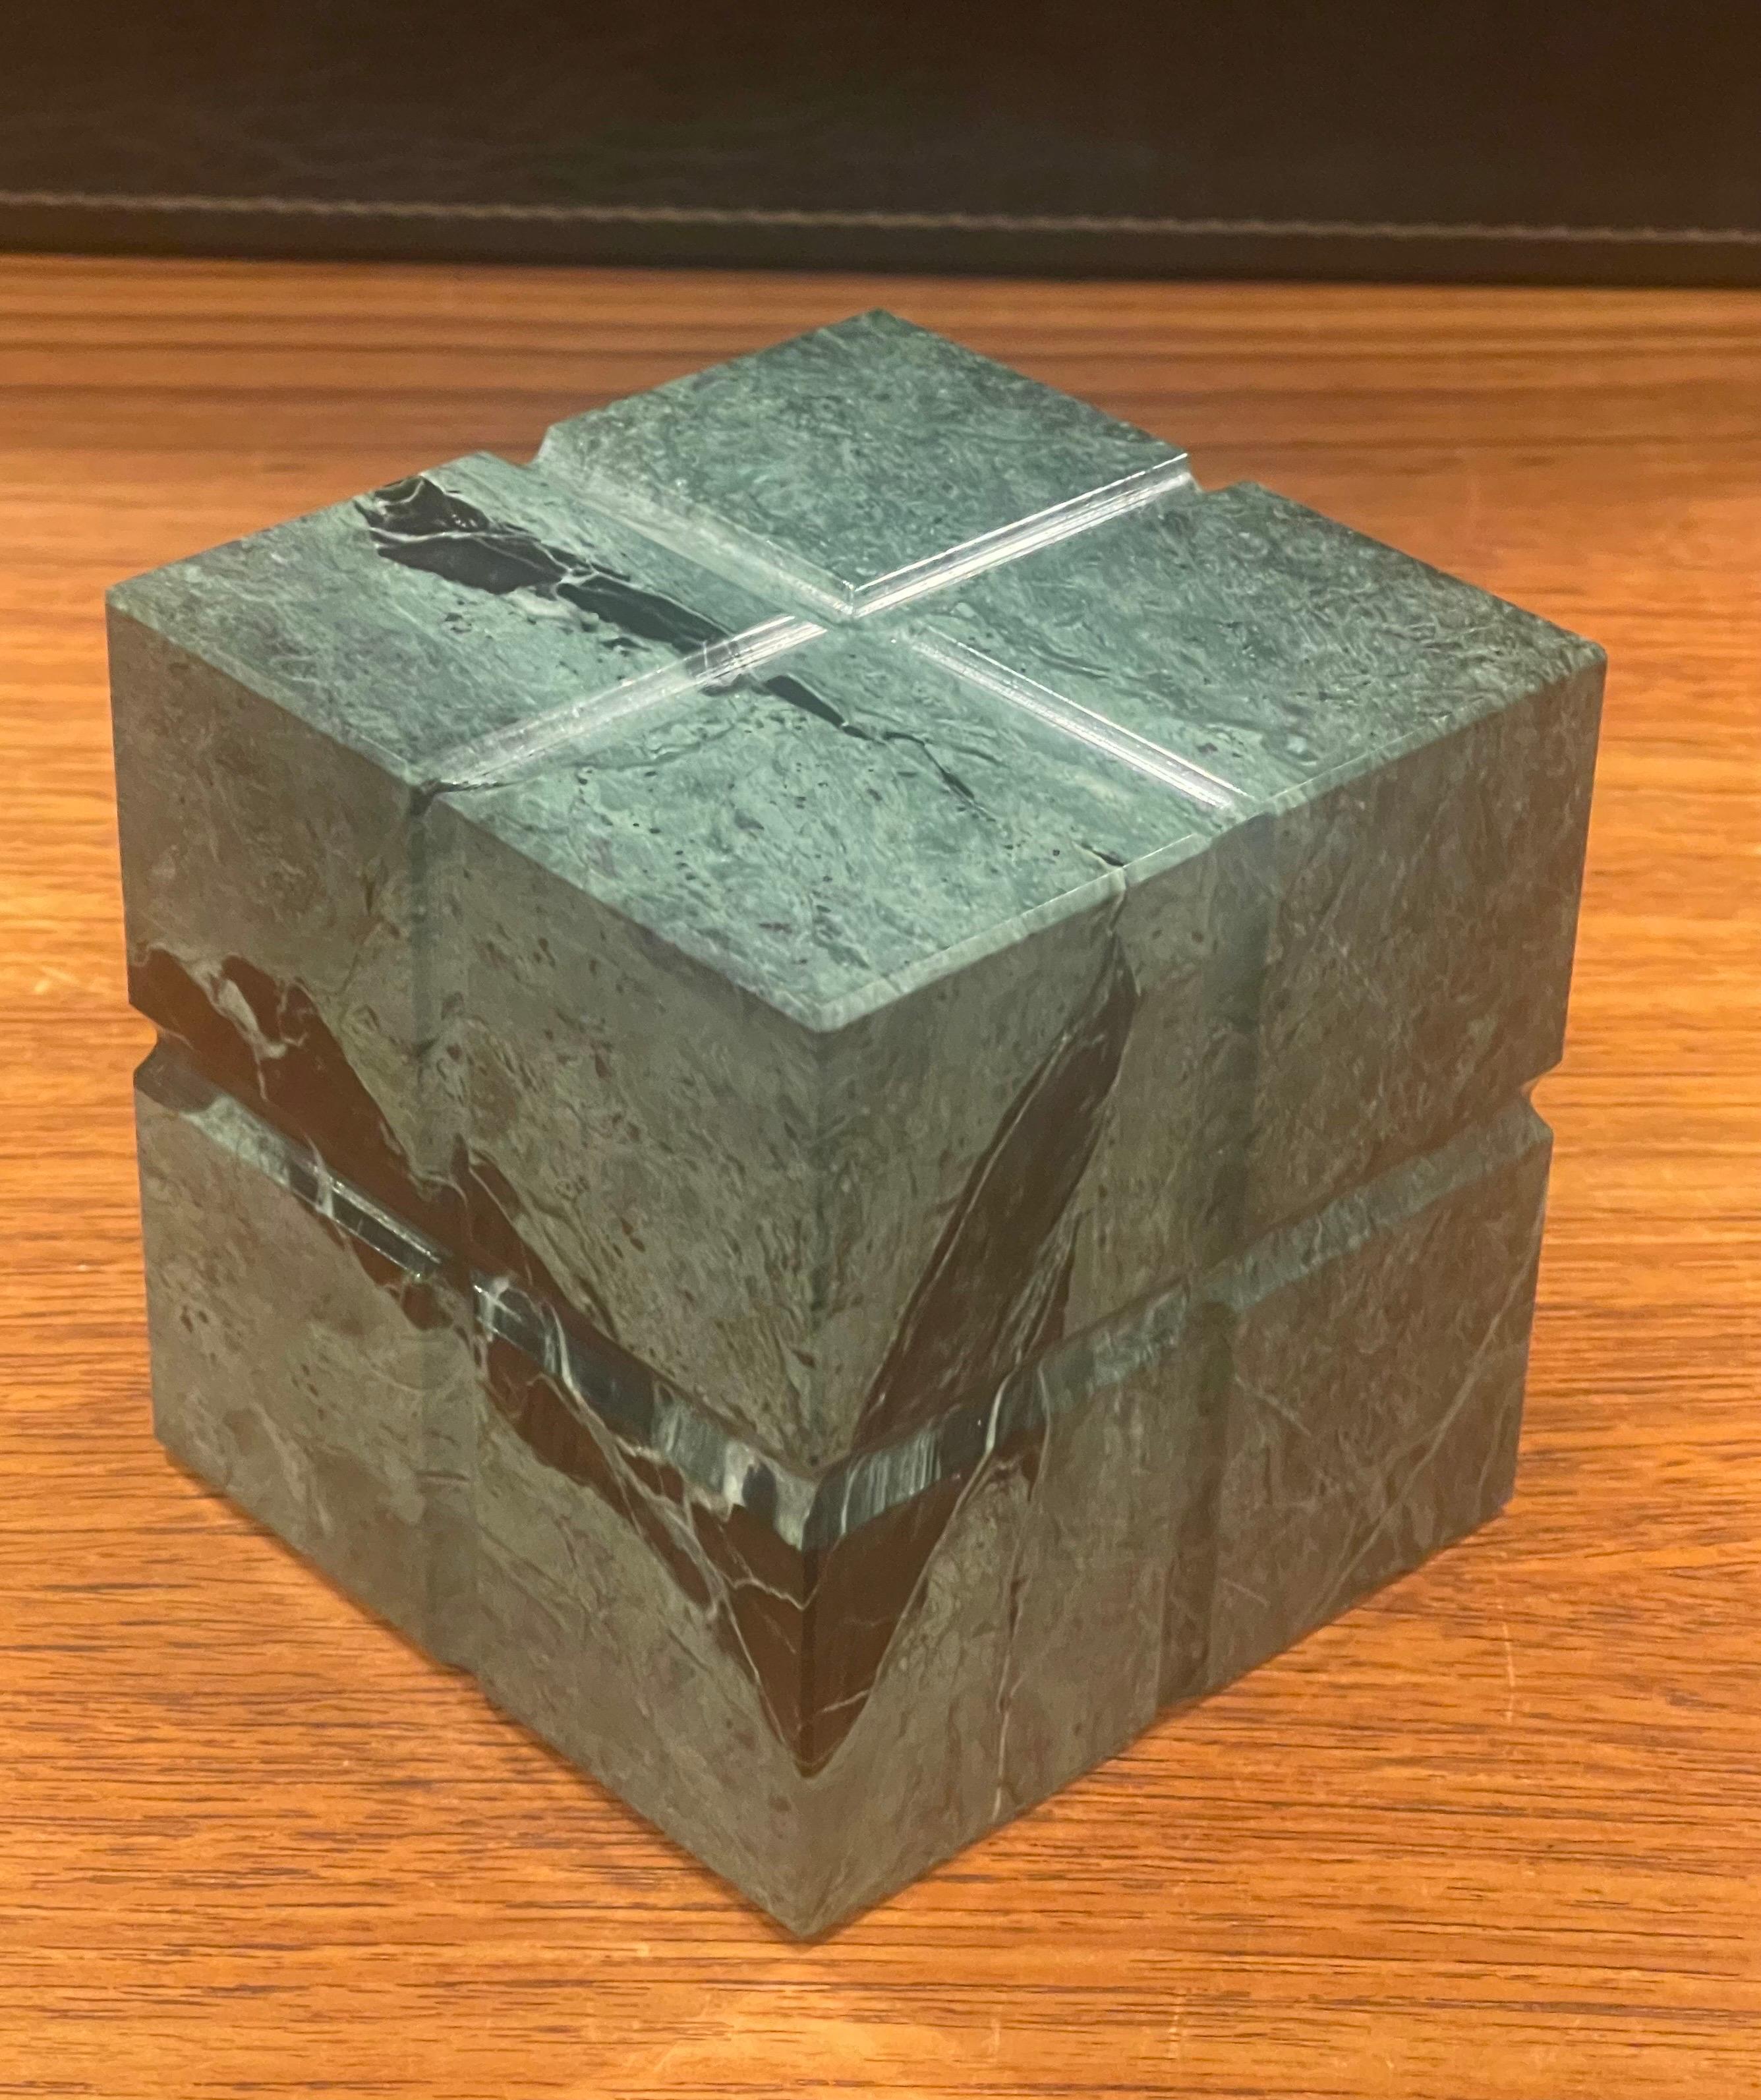 Gorgeous post-modern green marble block / paperweight ,circa 1980s. The piece is in very good condition with no chips or cracks and measures 4